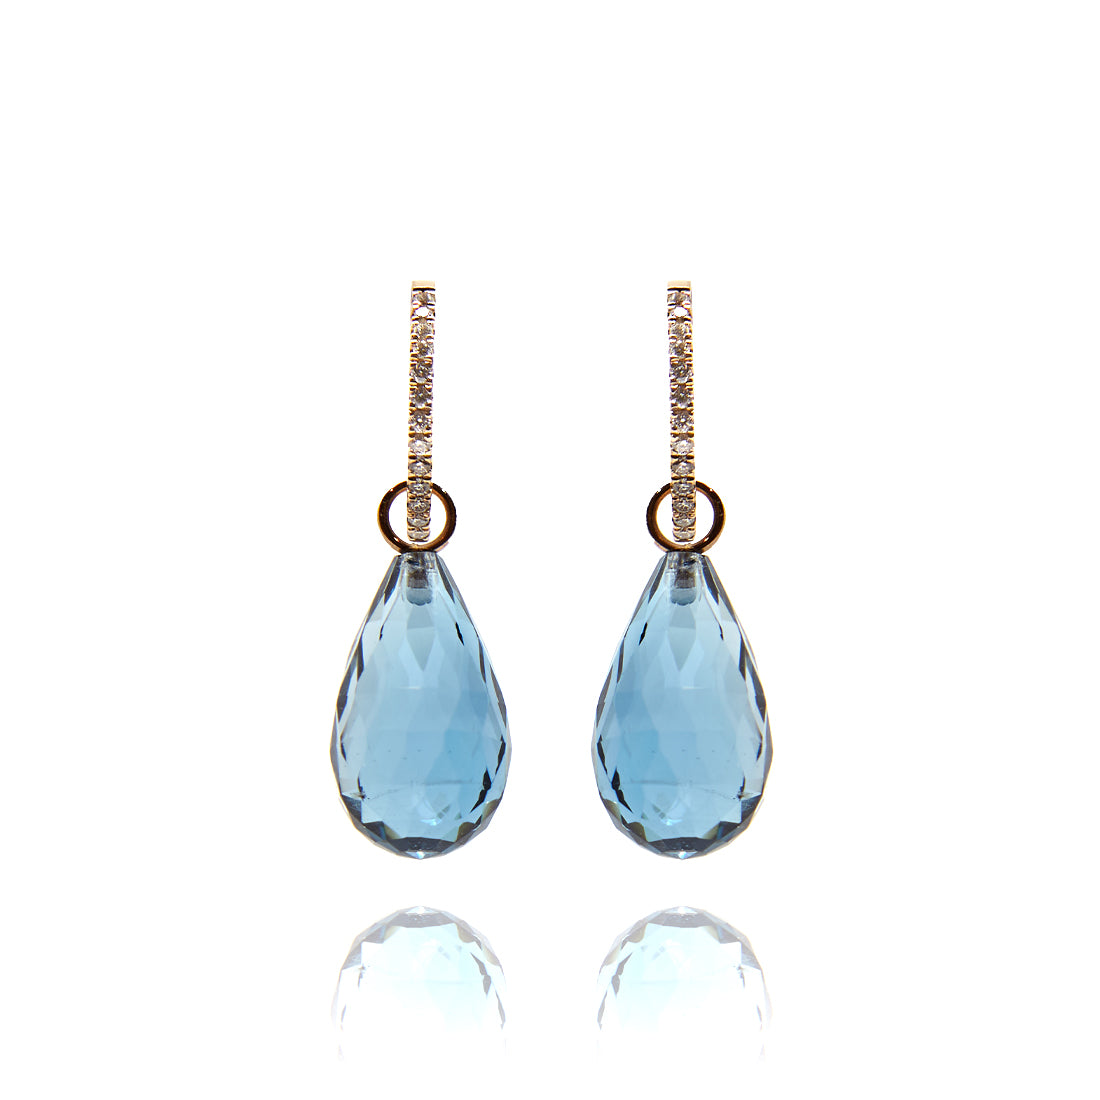 Rose gold earrings with diamond and London blue topaz 